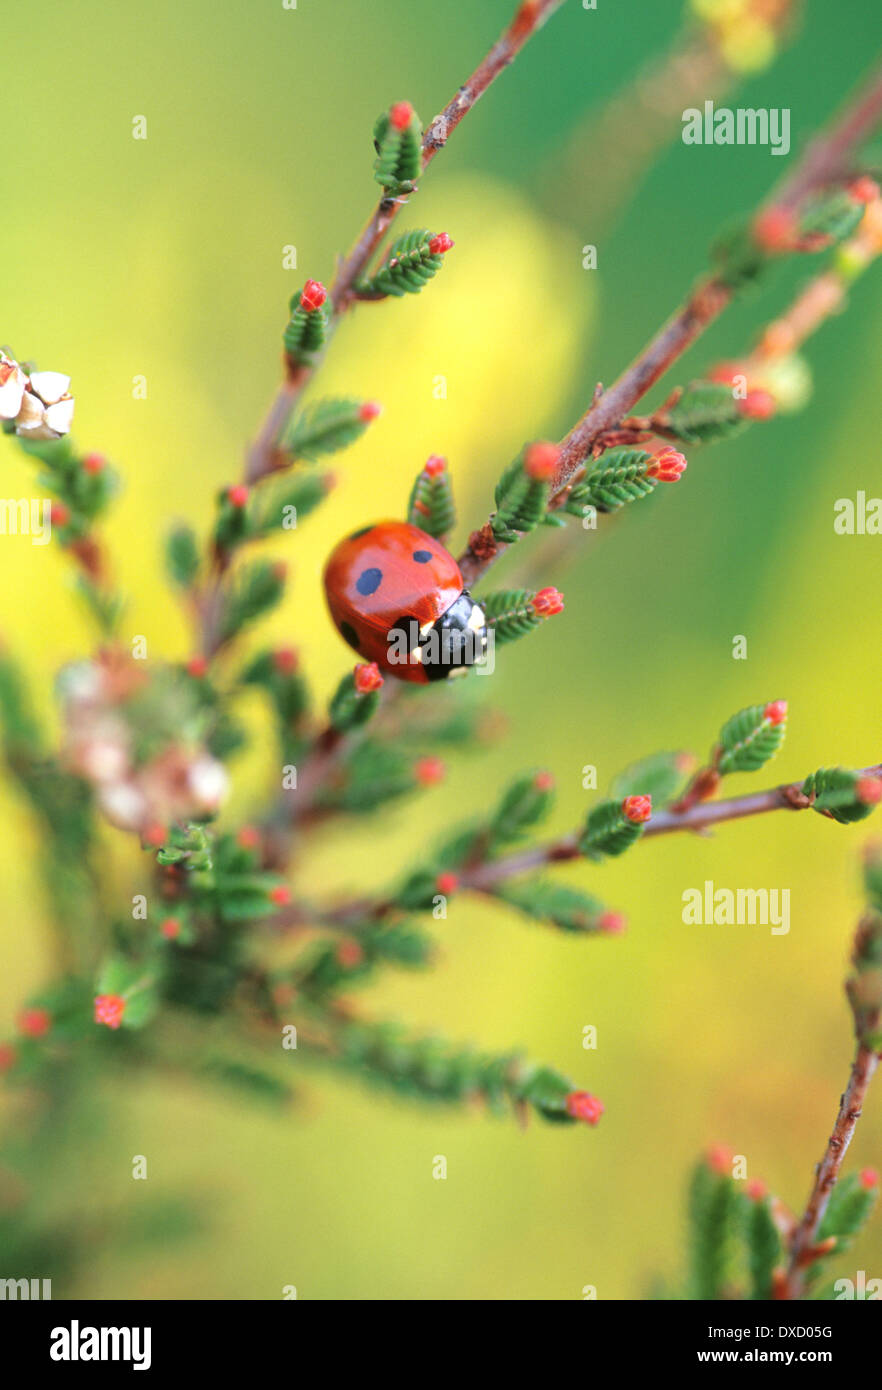 Editorial image of a Ladybird on heather in close up Stock Photo